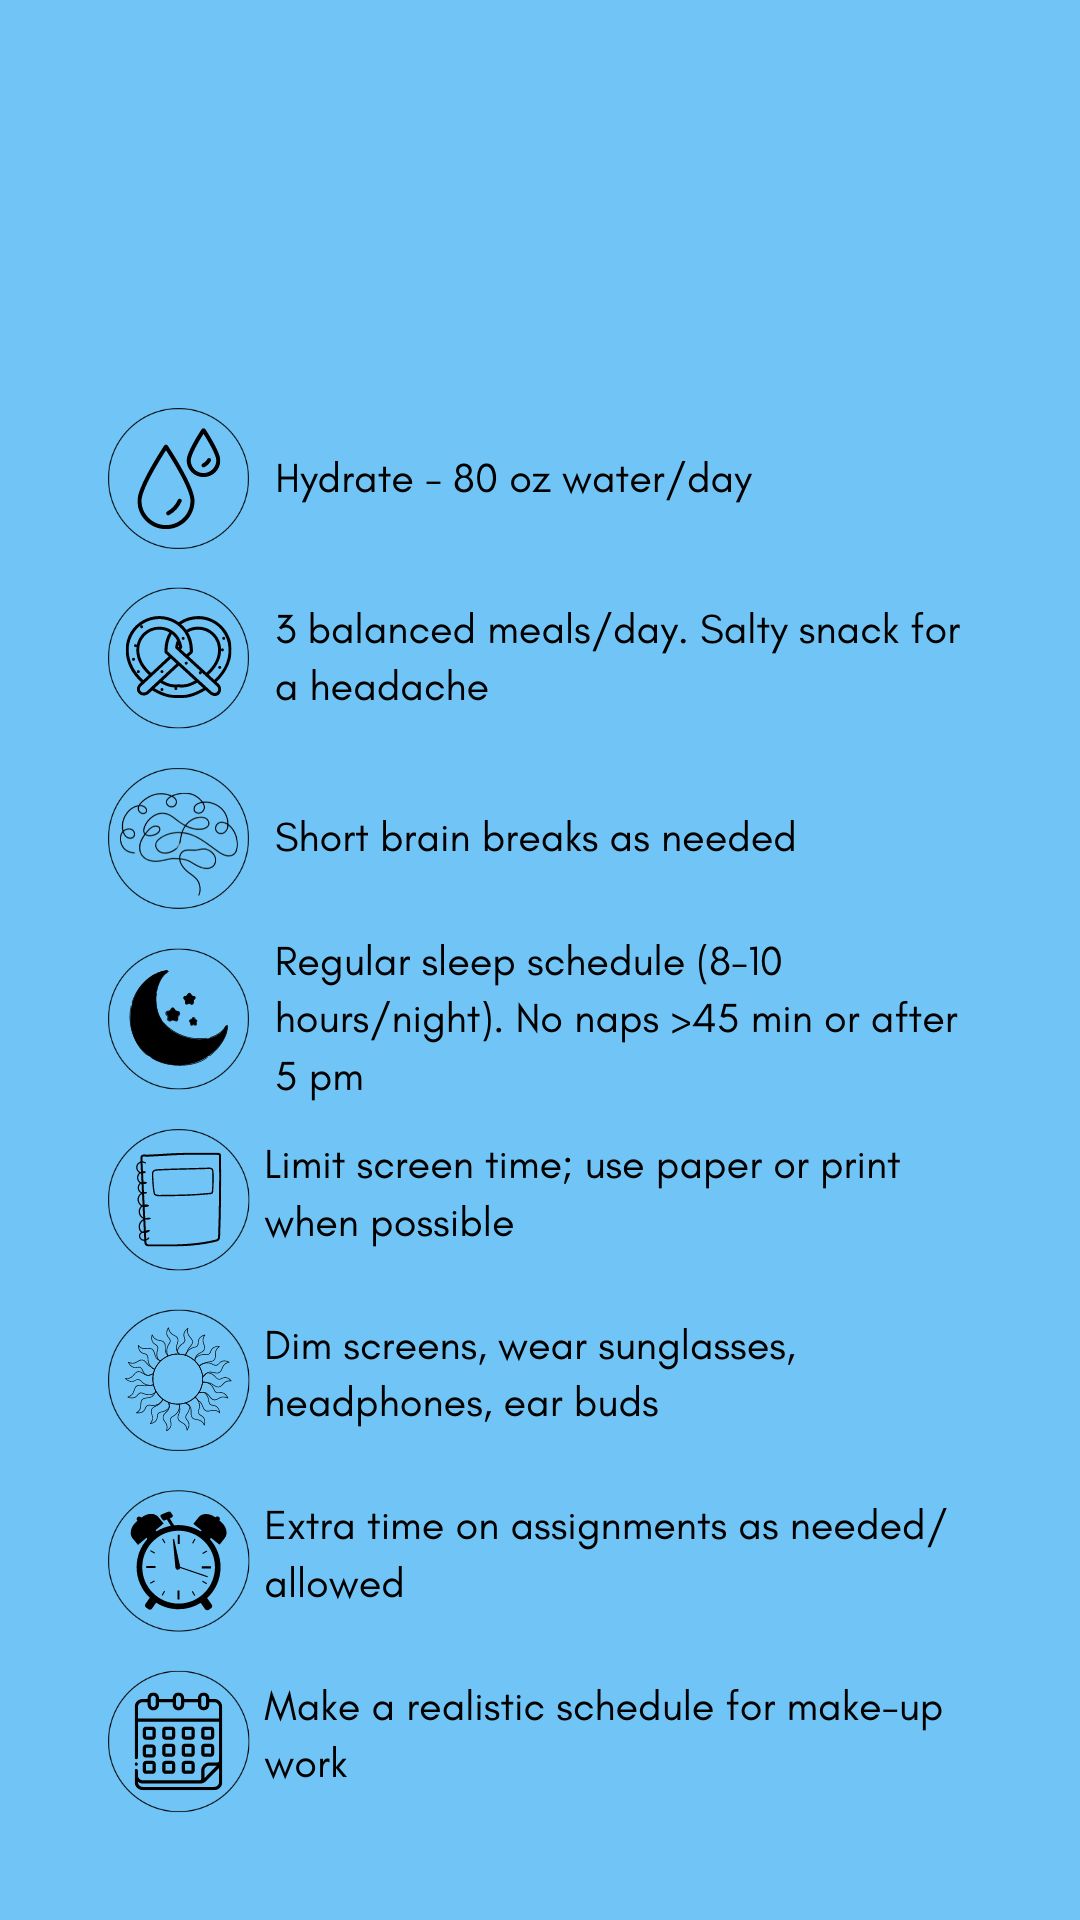 Concussion treatment tips in black graphics and text against a blue backdrop. The tips include hydrate (80 oz. water/day). Eat 3 balanced meals/day, salt snack for headache. Short brain breaks as needed, Sleep time (8-10 hrs/night), no naps > 45 mins. or after 5 pm. Limit screens, use paper/print. when possible .Dim screens. wear sunglasses, headphones, earbuds. Allow extra time on assignments as allowed. Pace yourself. Make a realistic schedule for make-up work.